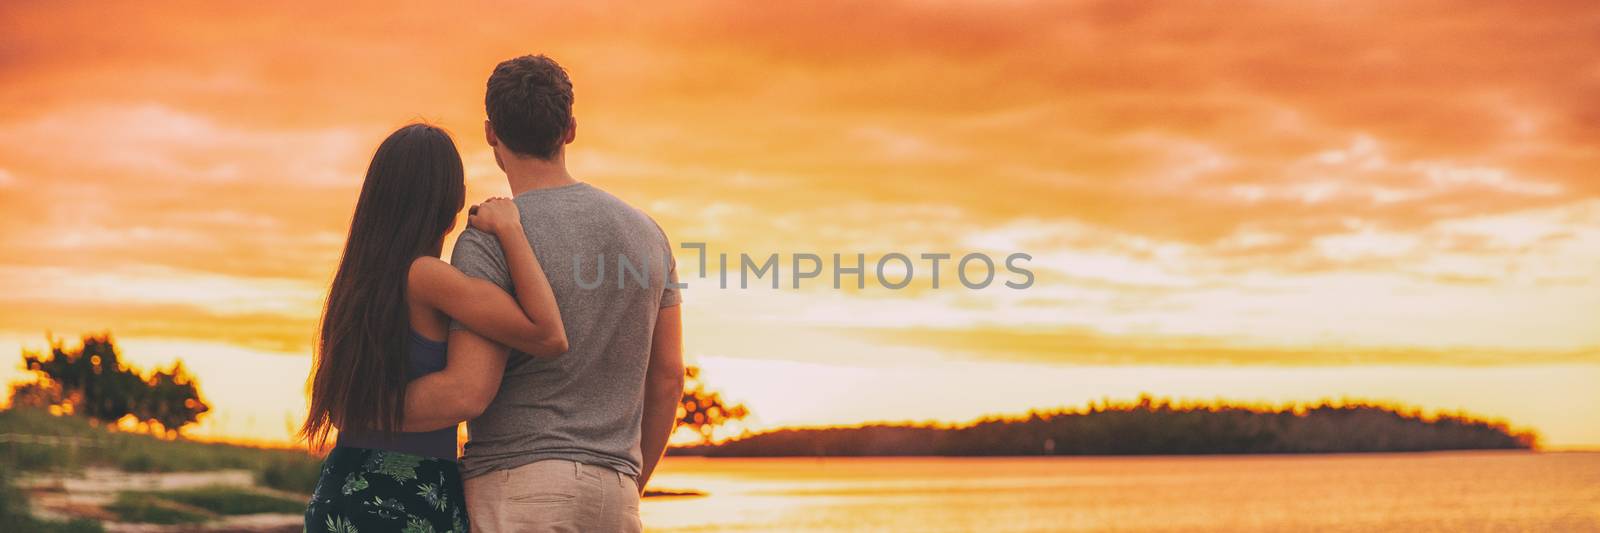 Couple watching sunset on summer adventure travel at beach panoramic banner - glow sky background at dusk by Maridav